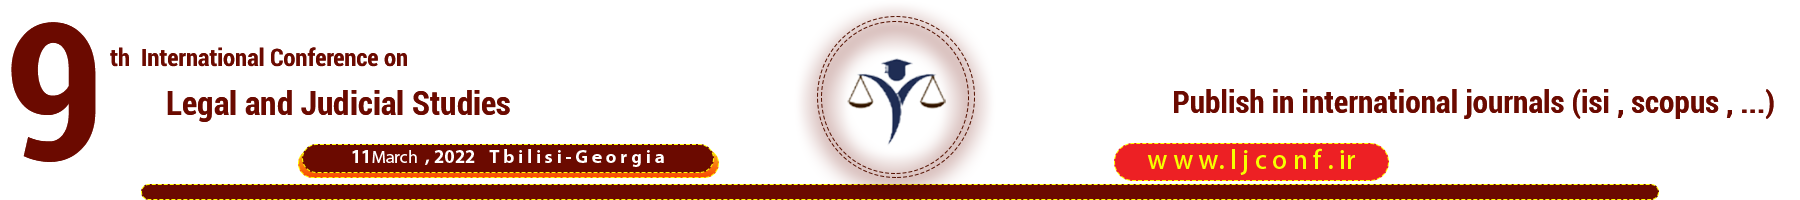 International Conference on Legal and Judicial Studies